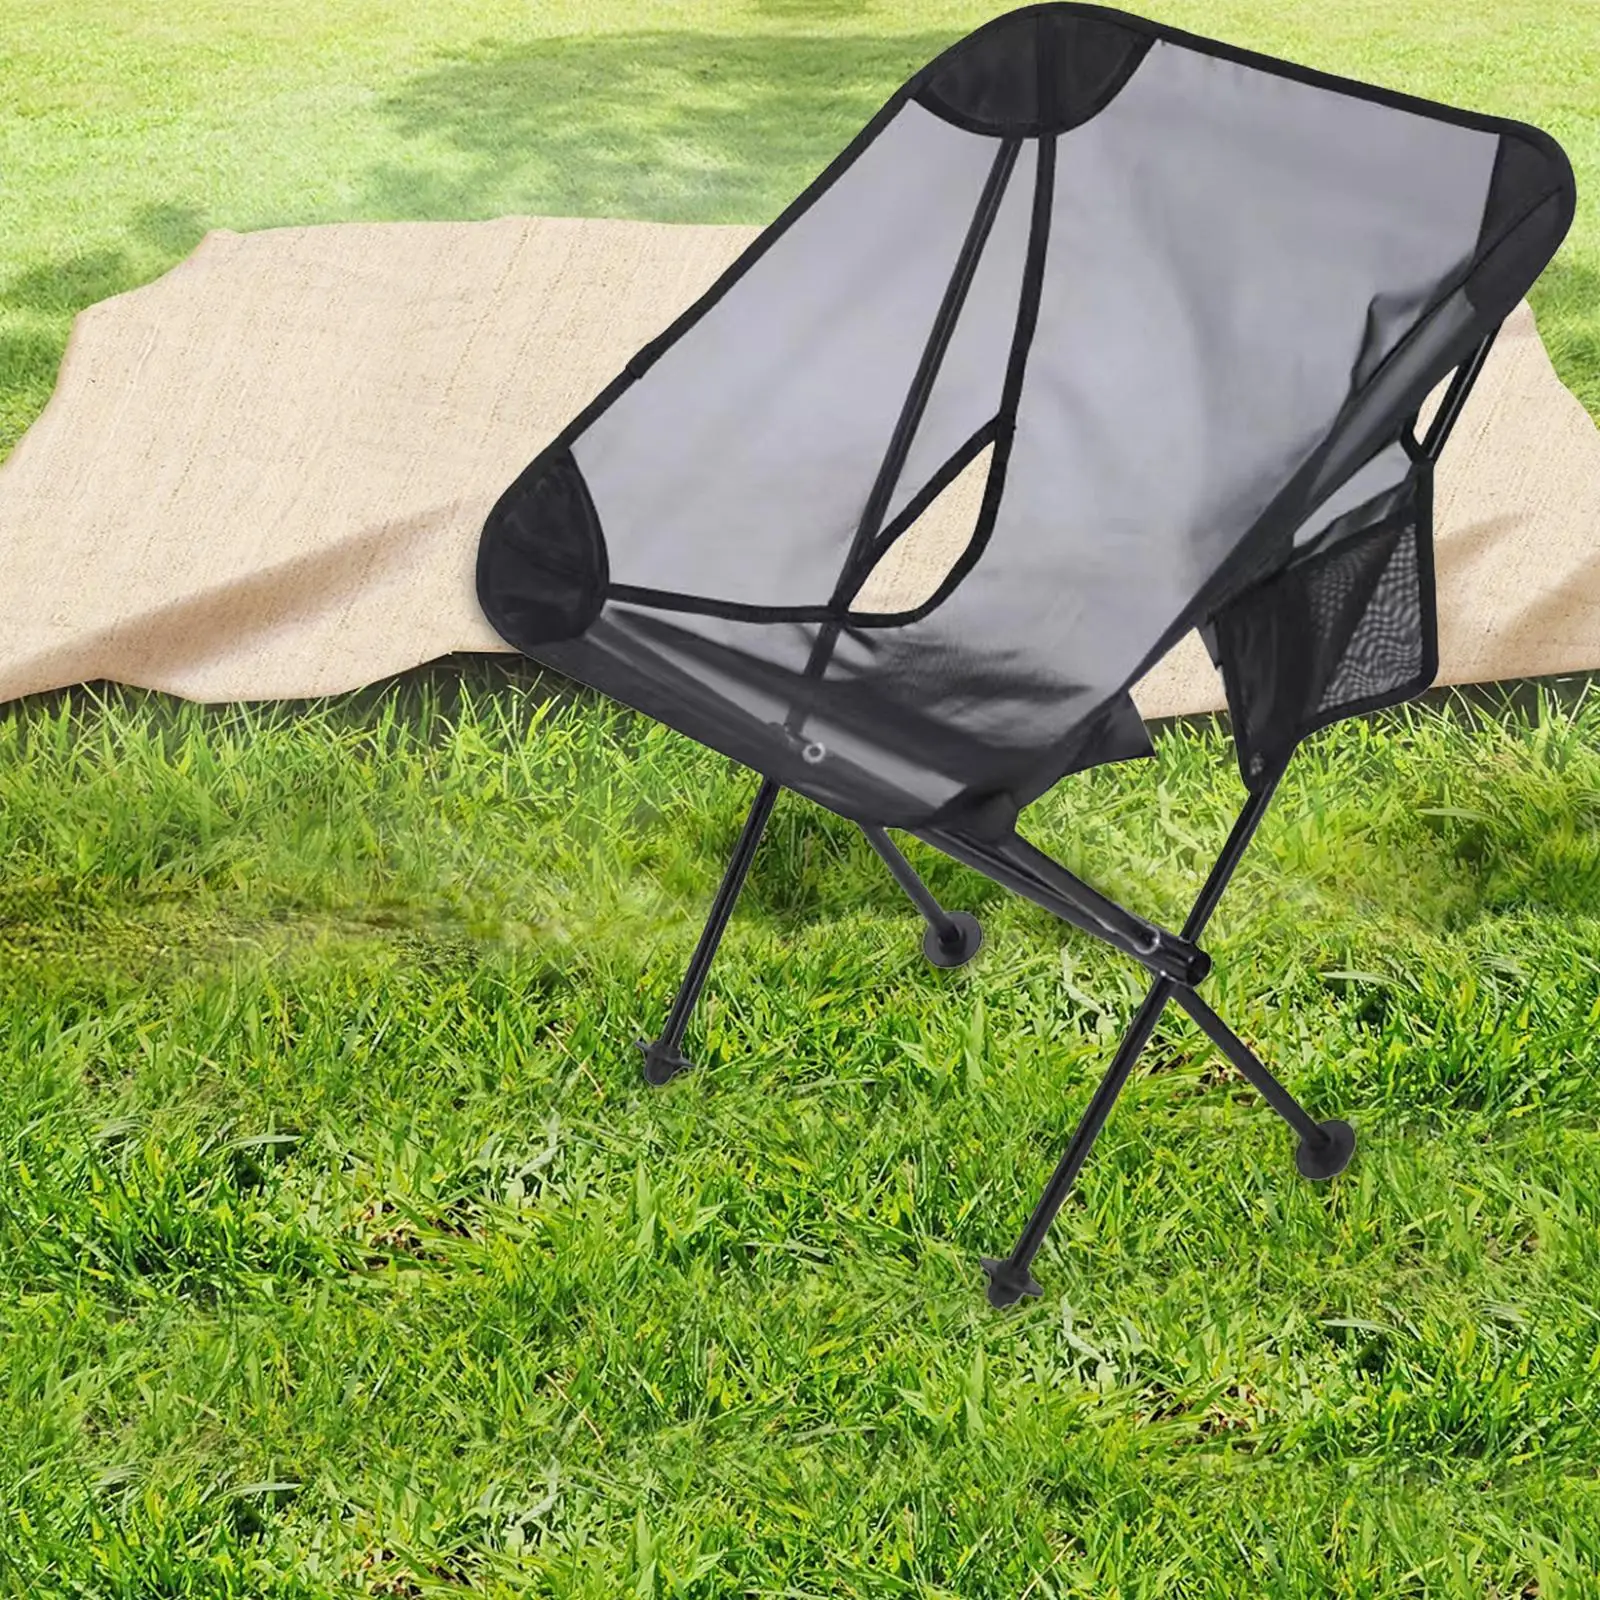 Folding Camping Chair Outdoor Concerts Practical Trekking Backpacking Sporting Events Campings Accessory Portable Folding Chair